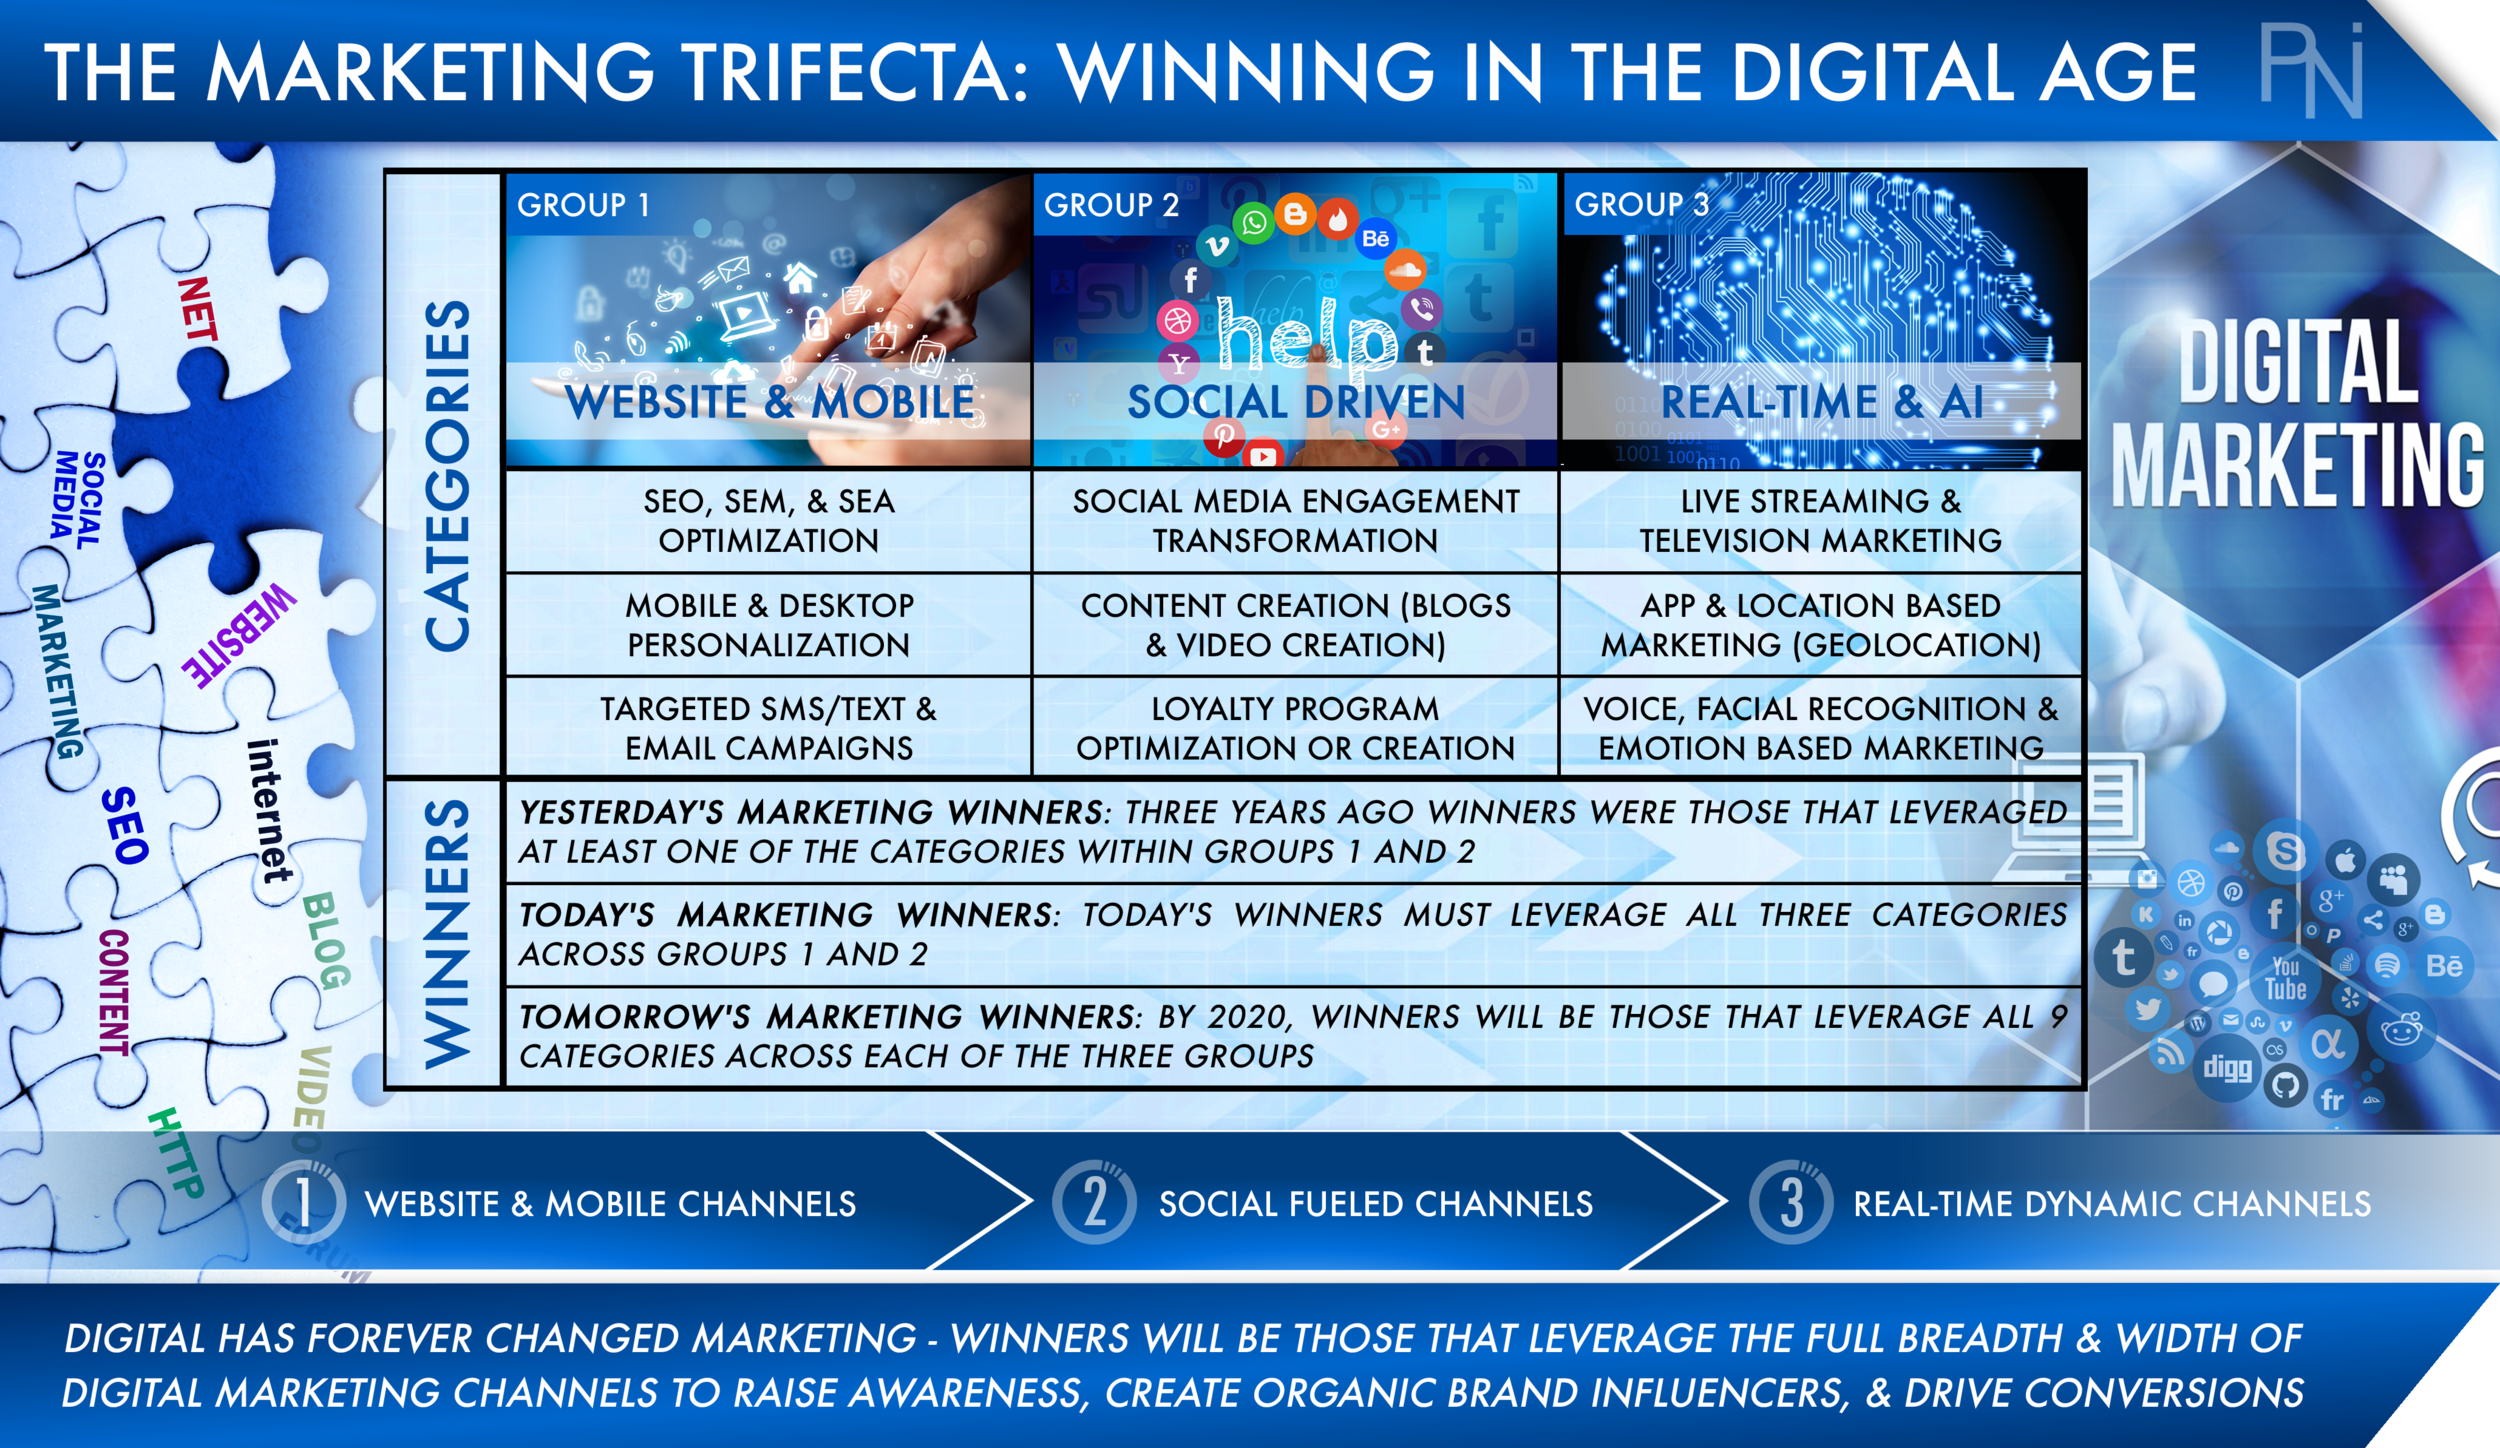 The Marketing Trifecta - Winning in the Digital Age (PNI Consulting).png